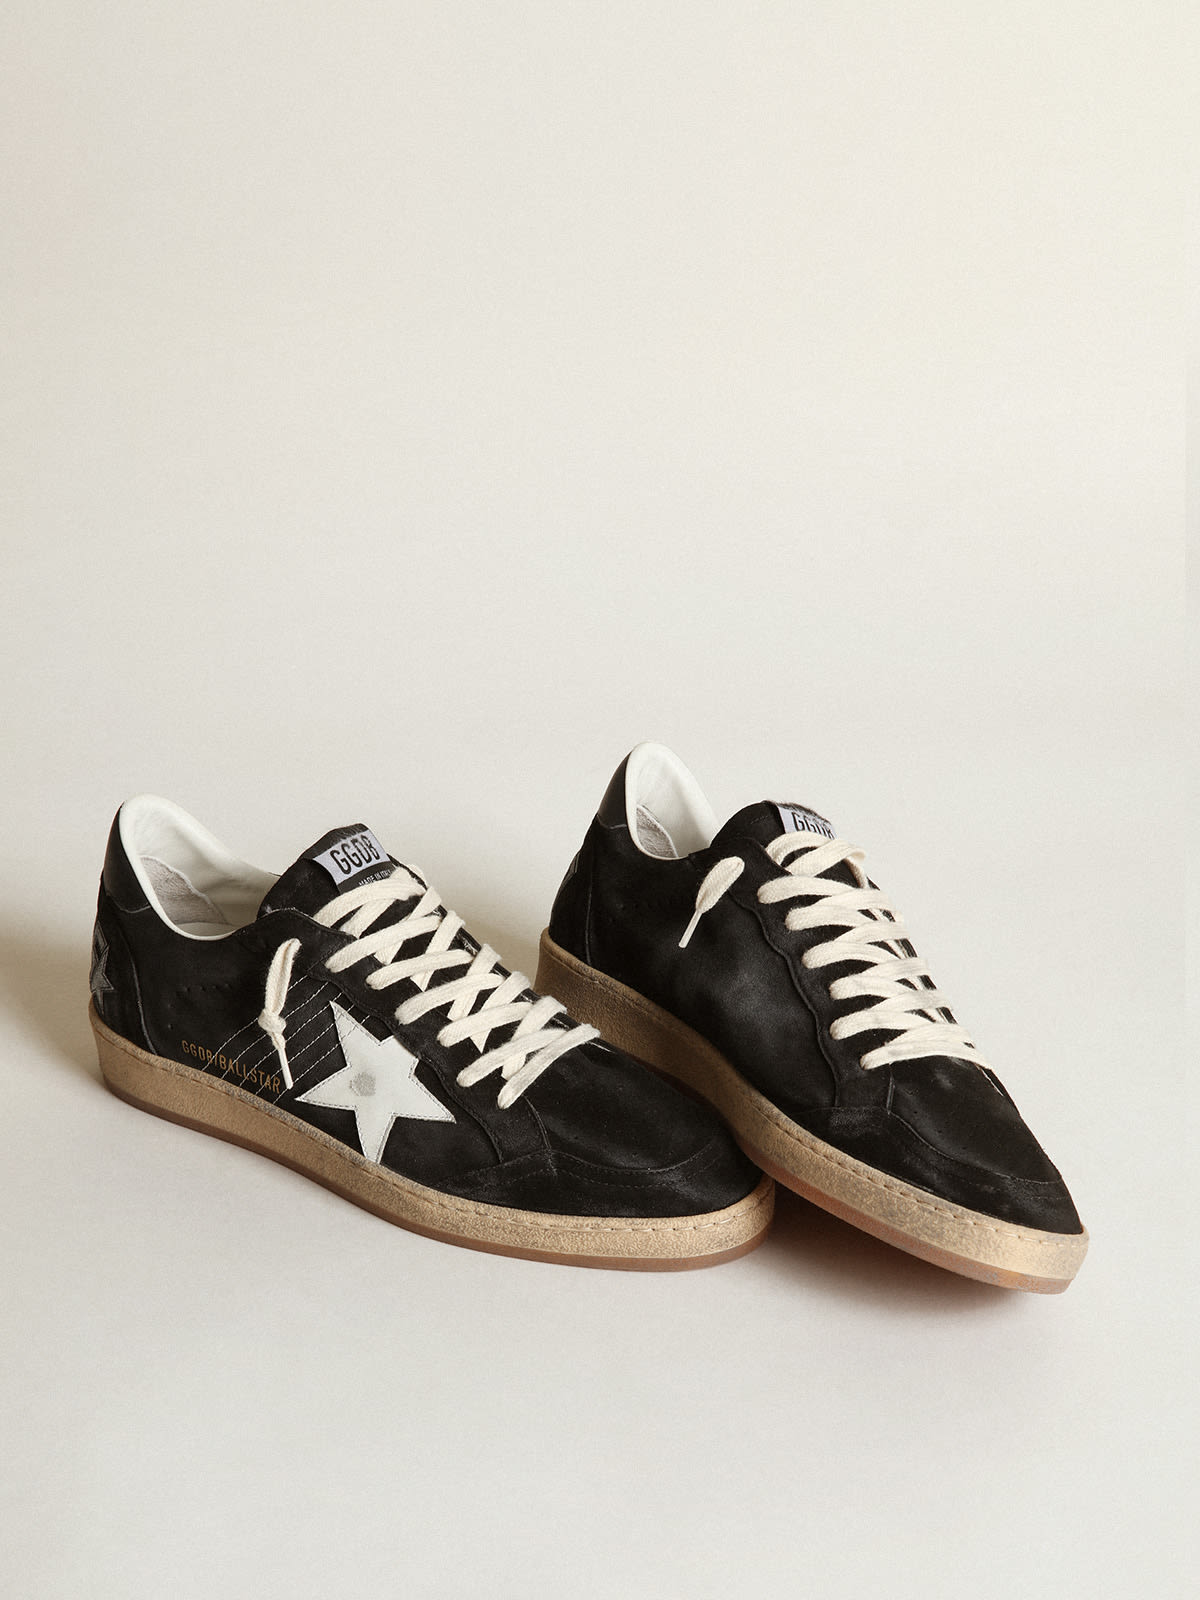 Golden Goose - Women's Ball Star in black suede with white leather star in 